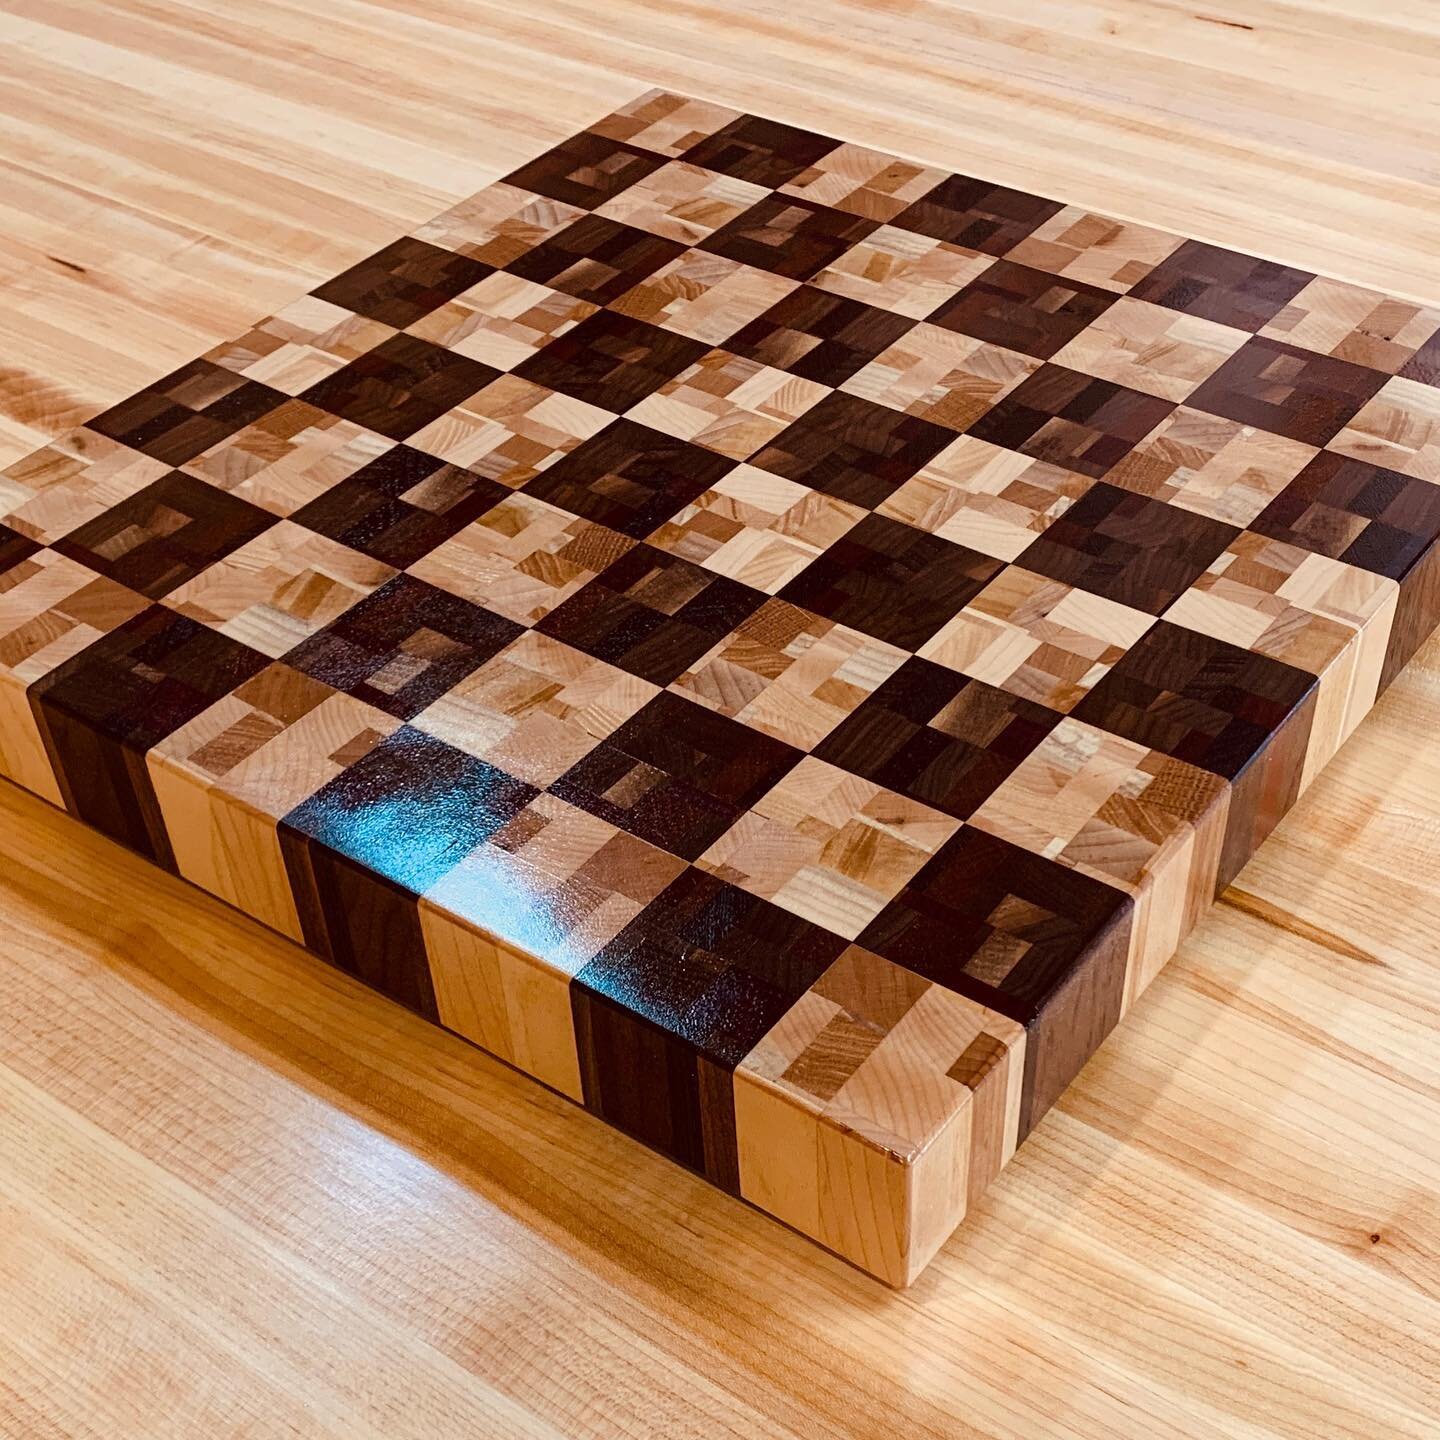 I&rsquo;ve had a little down time this week, so I finally finished this End grain chaotic pattern chess board. I&rsquo;ve made plenty of boards in the past but this one was really difficult. Time to play!#timeonourhands #pandemic #fuckyoucoronavirus